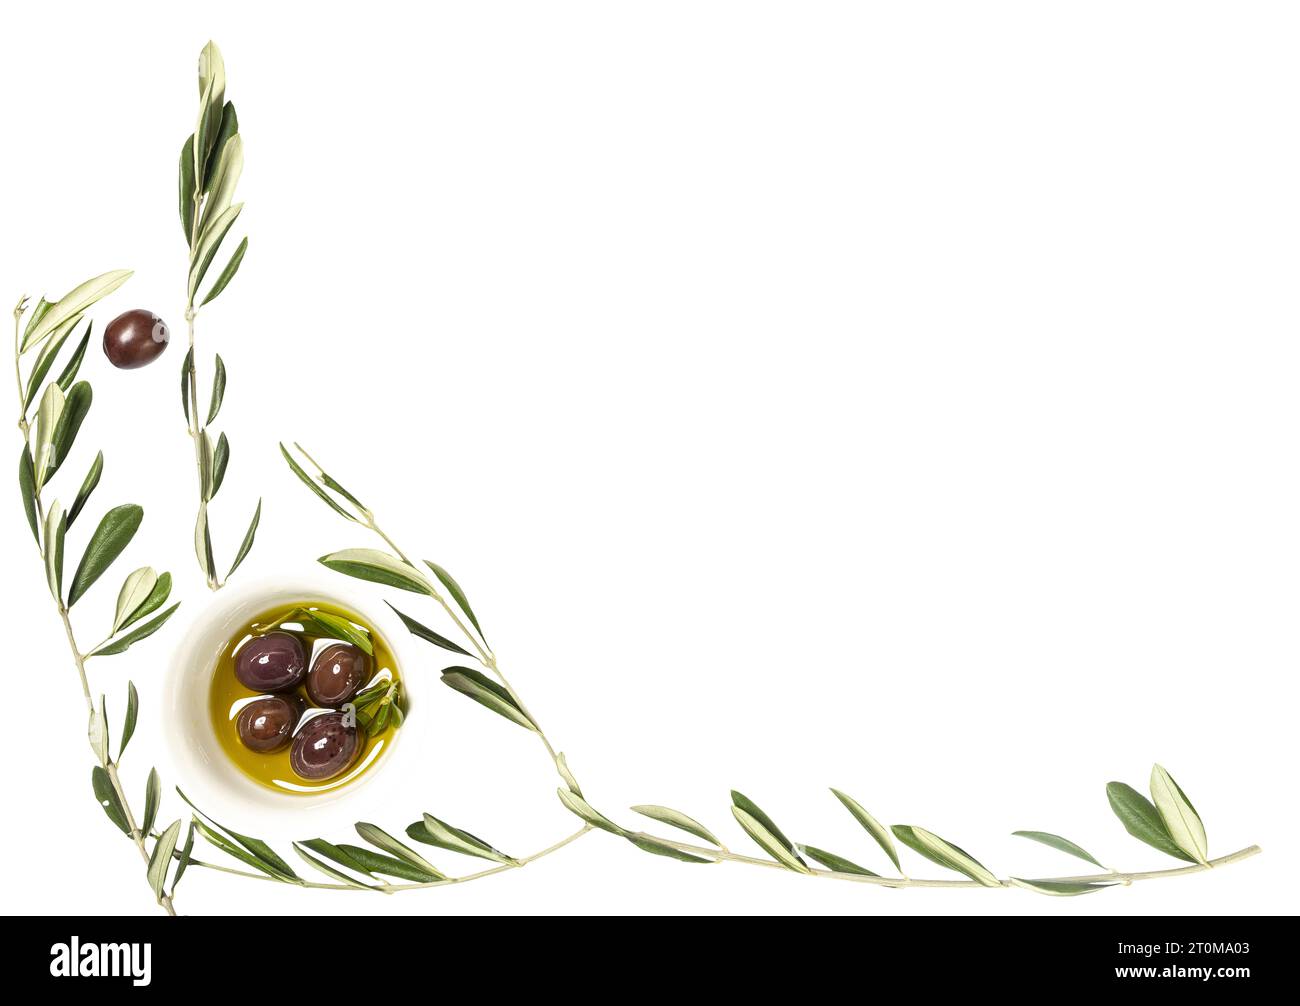 Olive oil and olives on a trasnparent background with some Olive branches Stock Photo